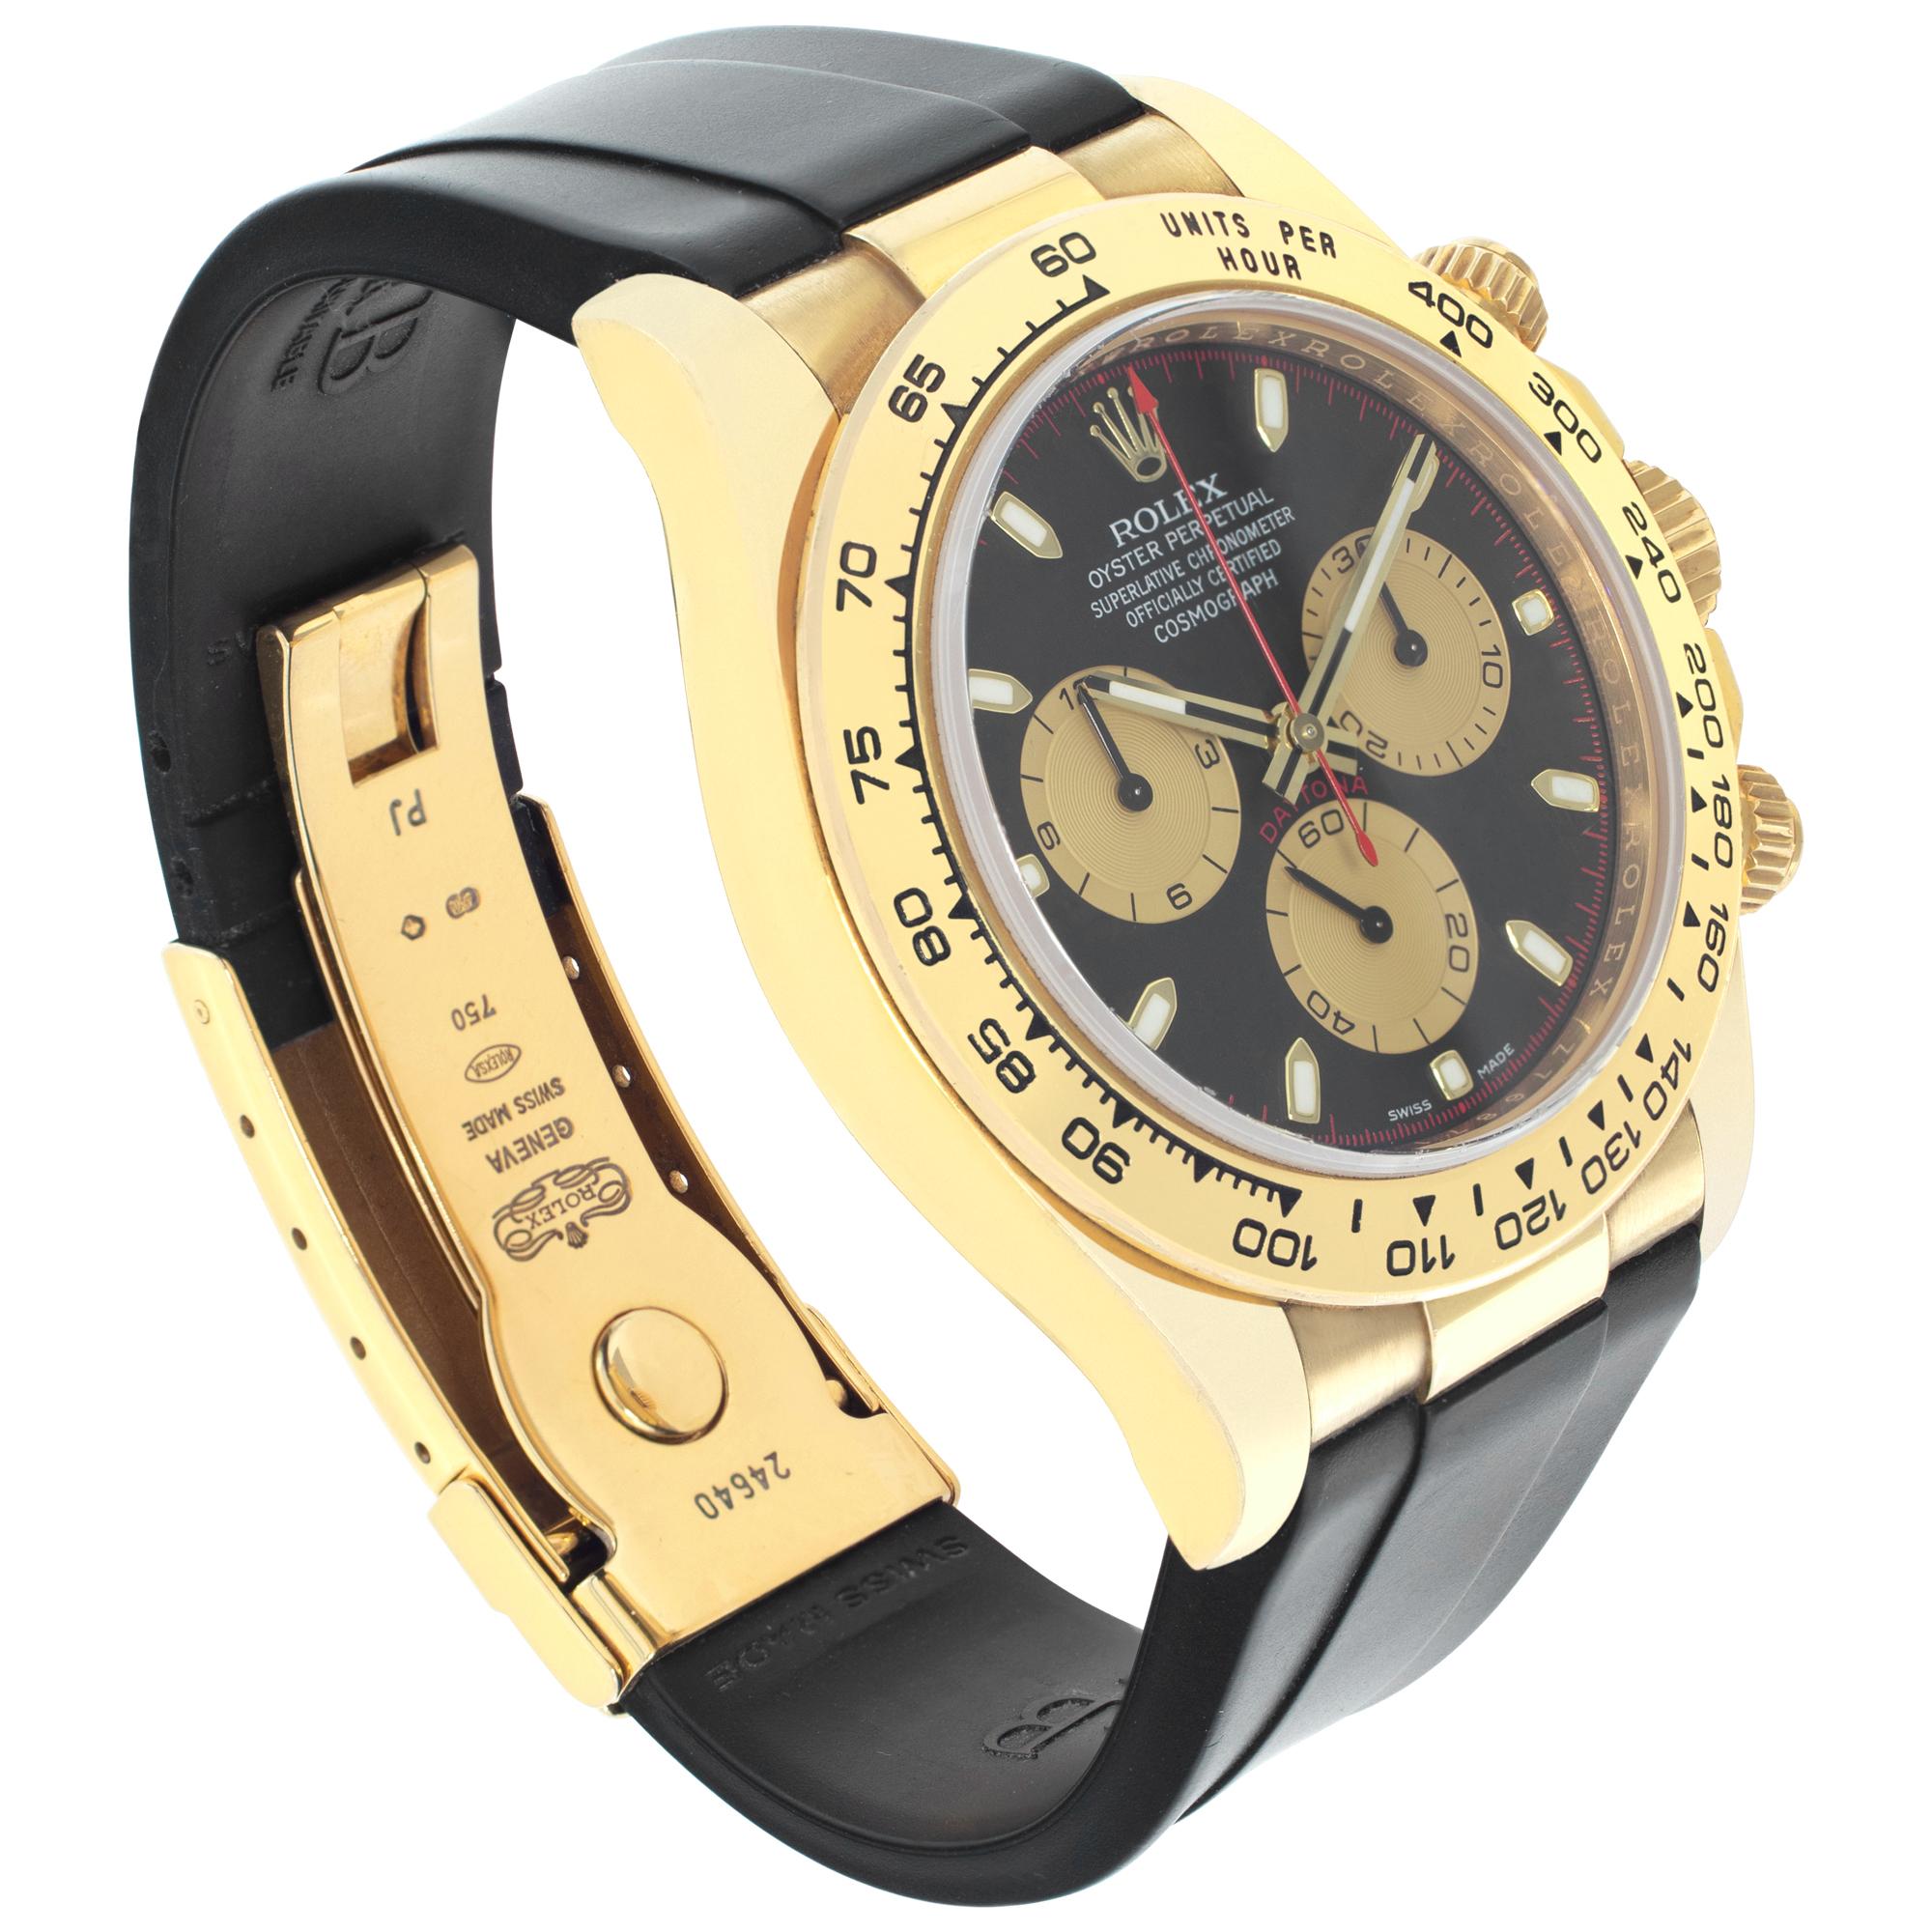 Rolex Daytona 18k yellow gold Automatic Wristwatch Ref 116518 In Excellent Condition For Sale In Surfside, FL